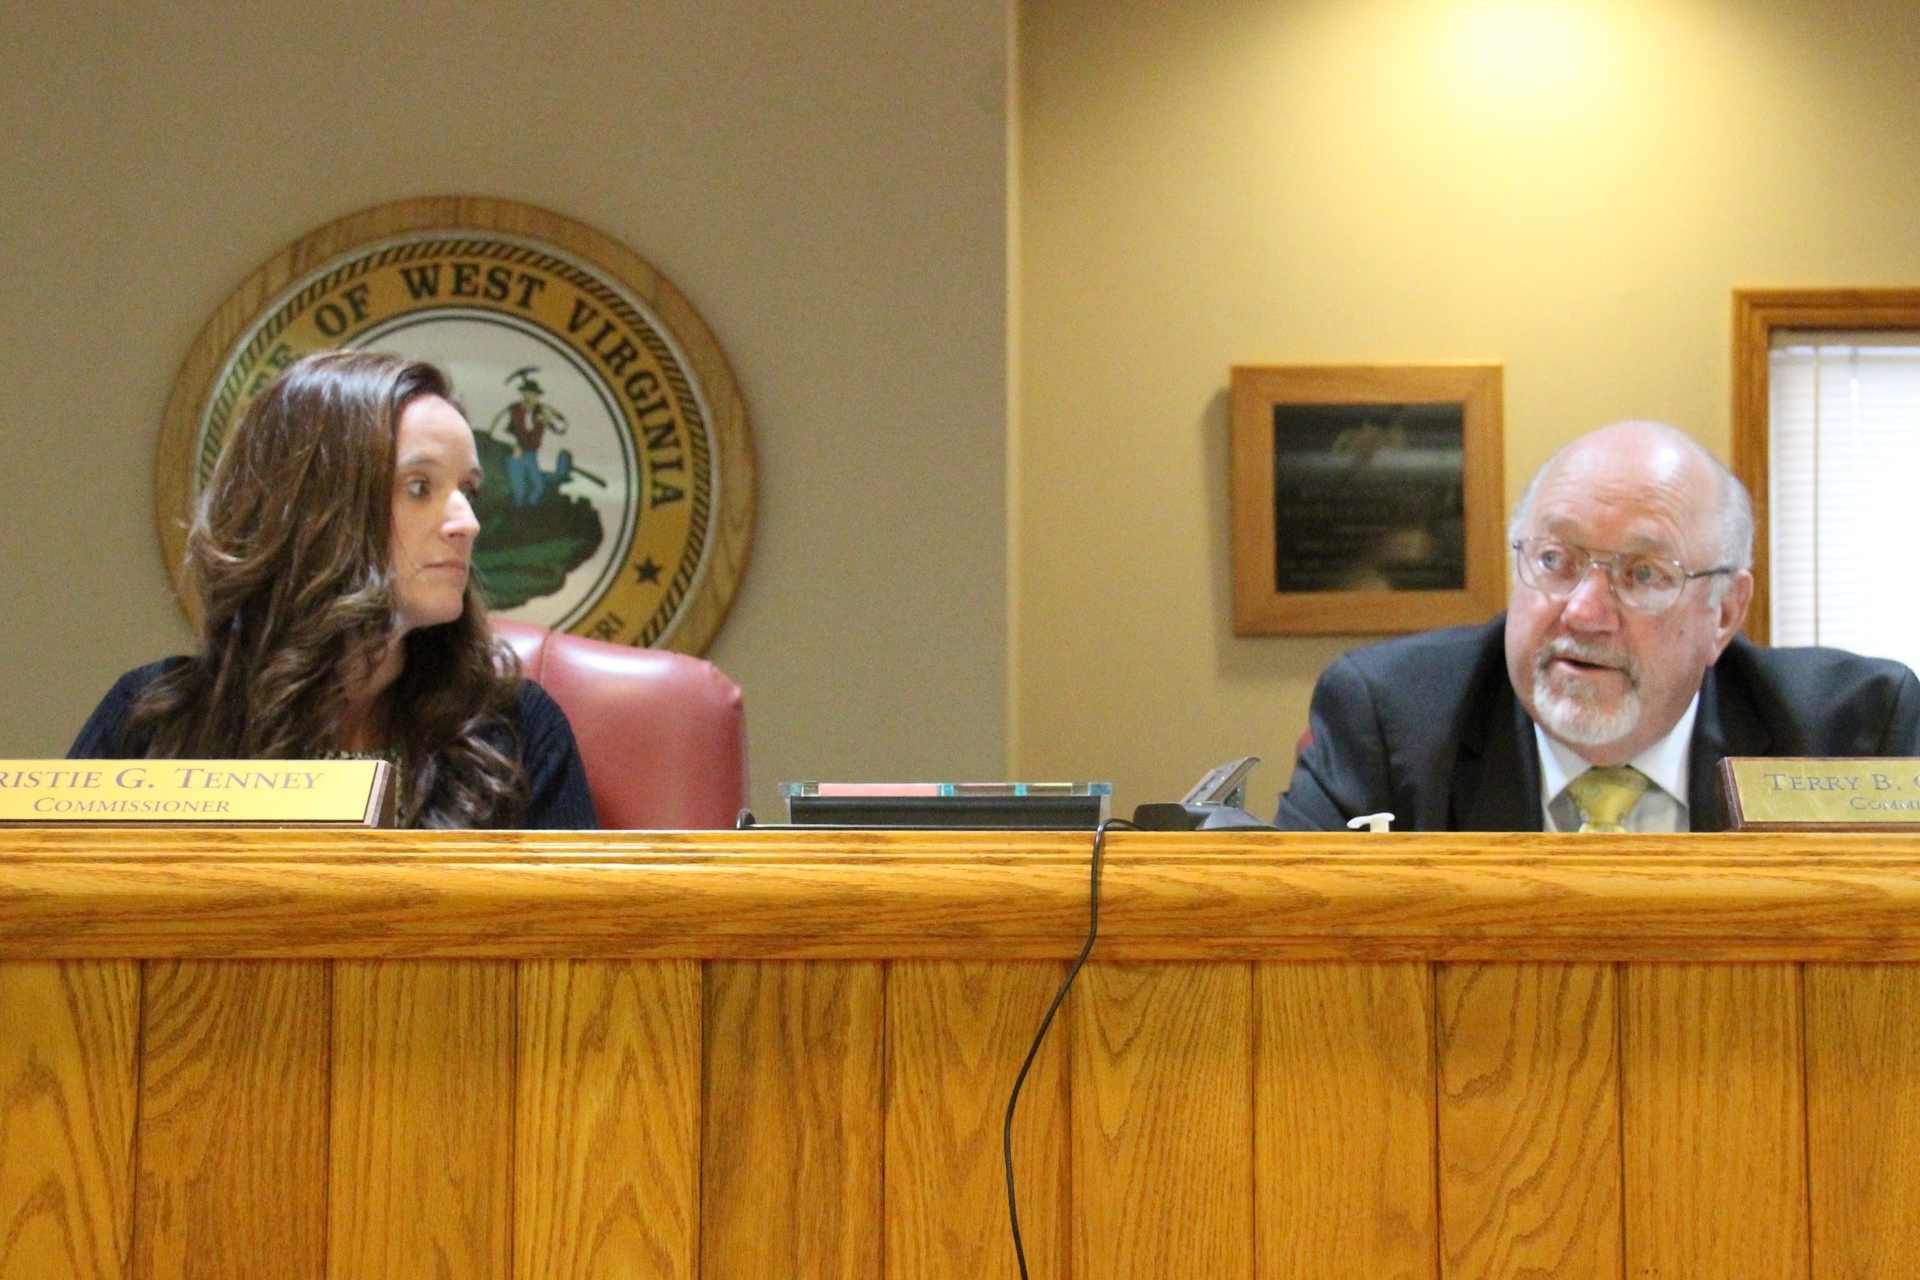 Upshur County Commission president Kristie Tenney listens as commissioner Terry Cutright praises outgoing administrator Carrie Wallace and welcomes her replacement, Tabatha Perry.